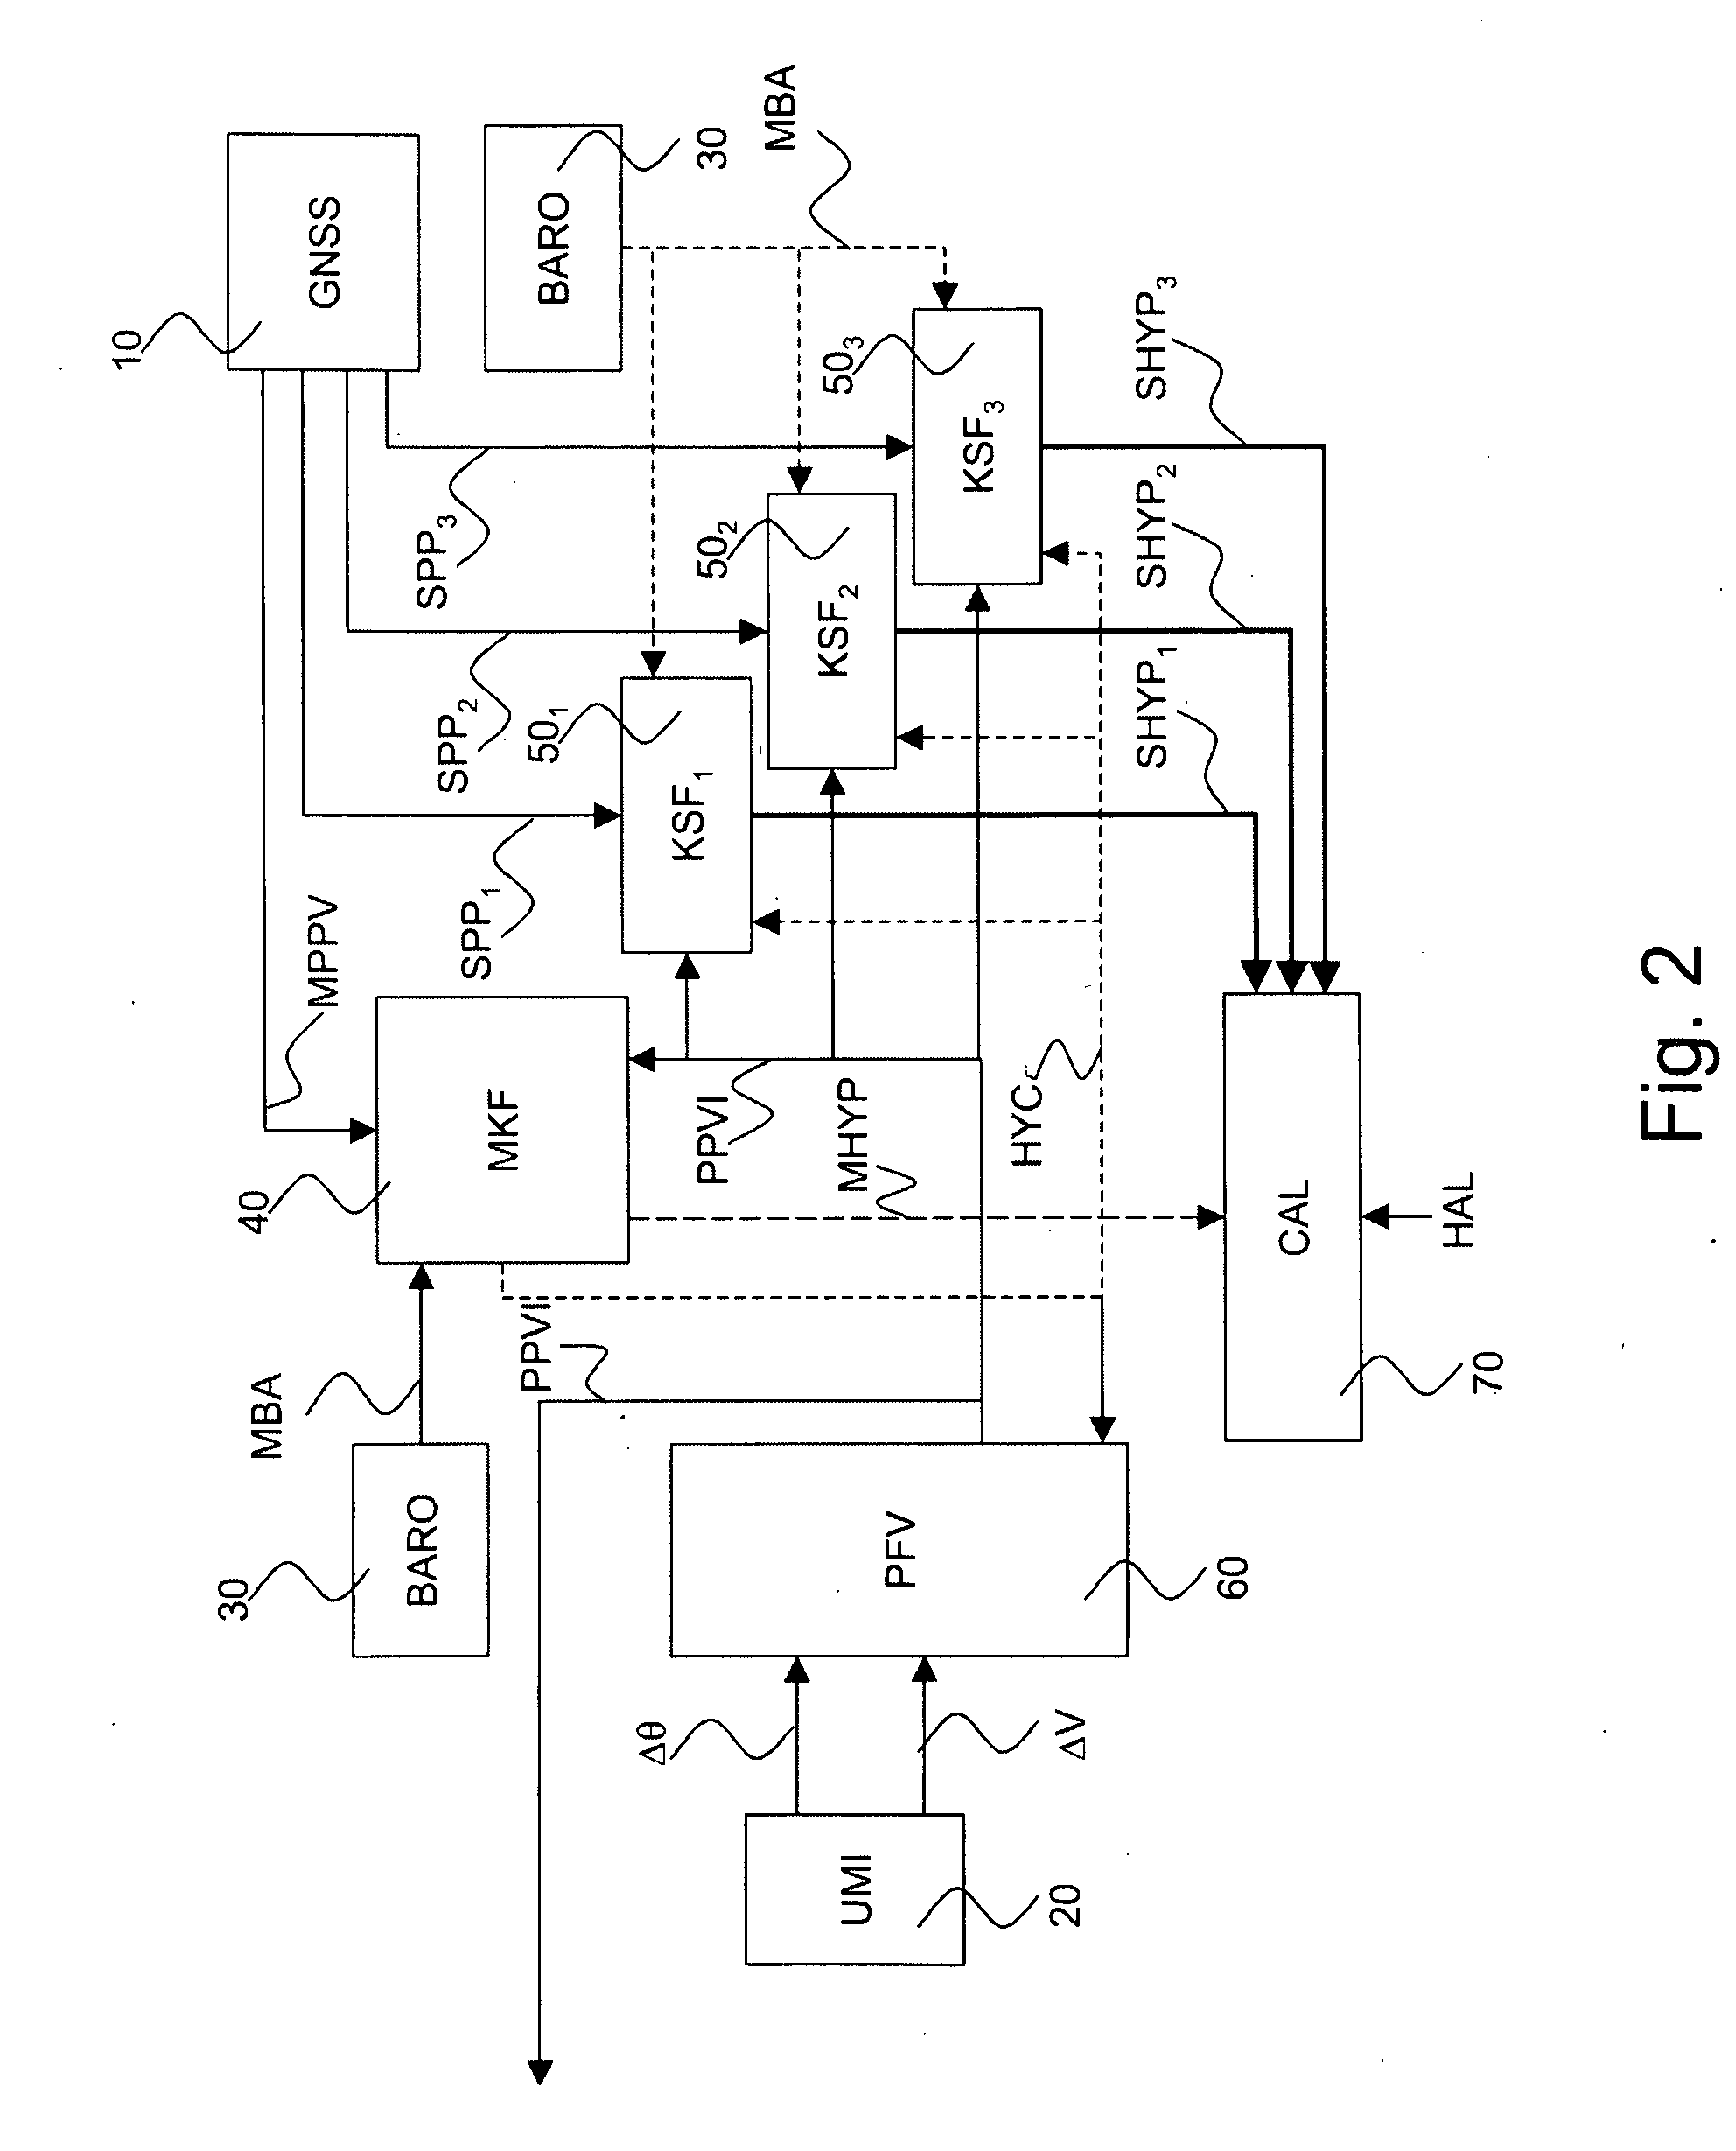 Hybrid ins/gnss system with integrity monitoring and method for integrity monitoring